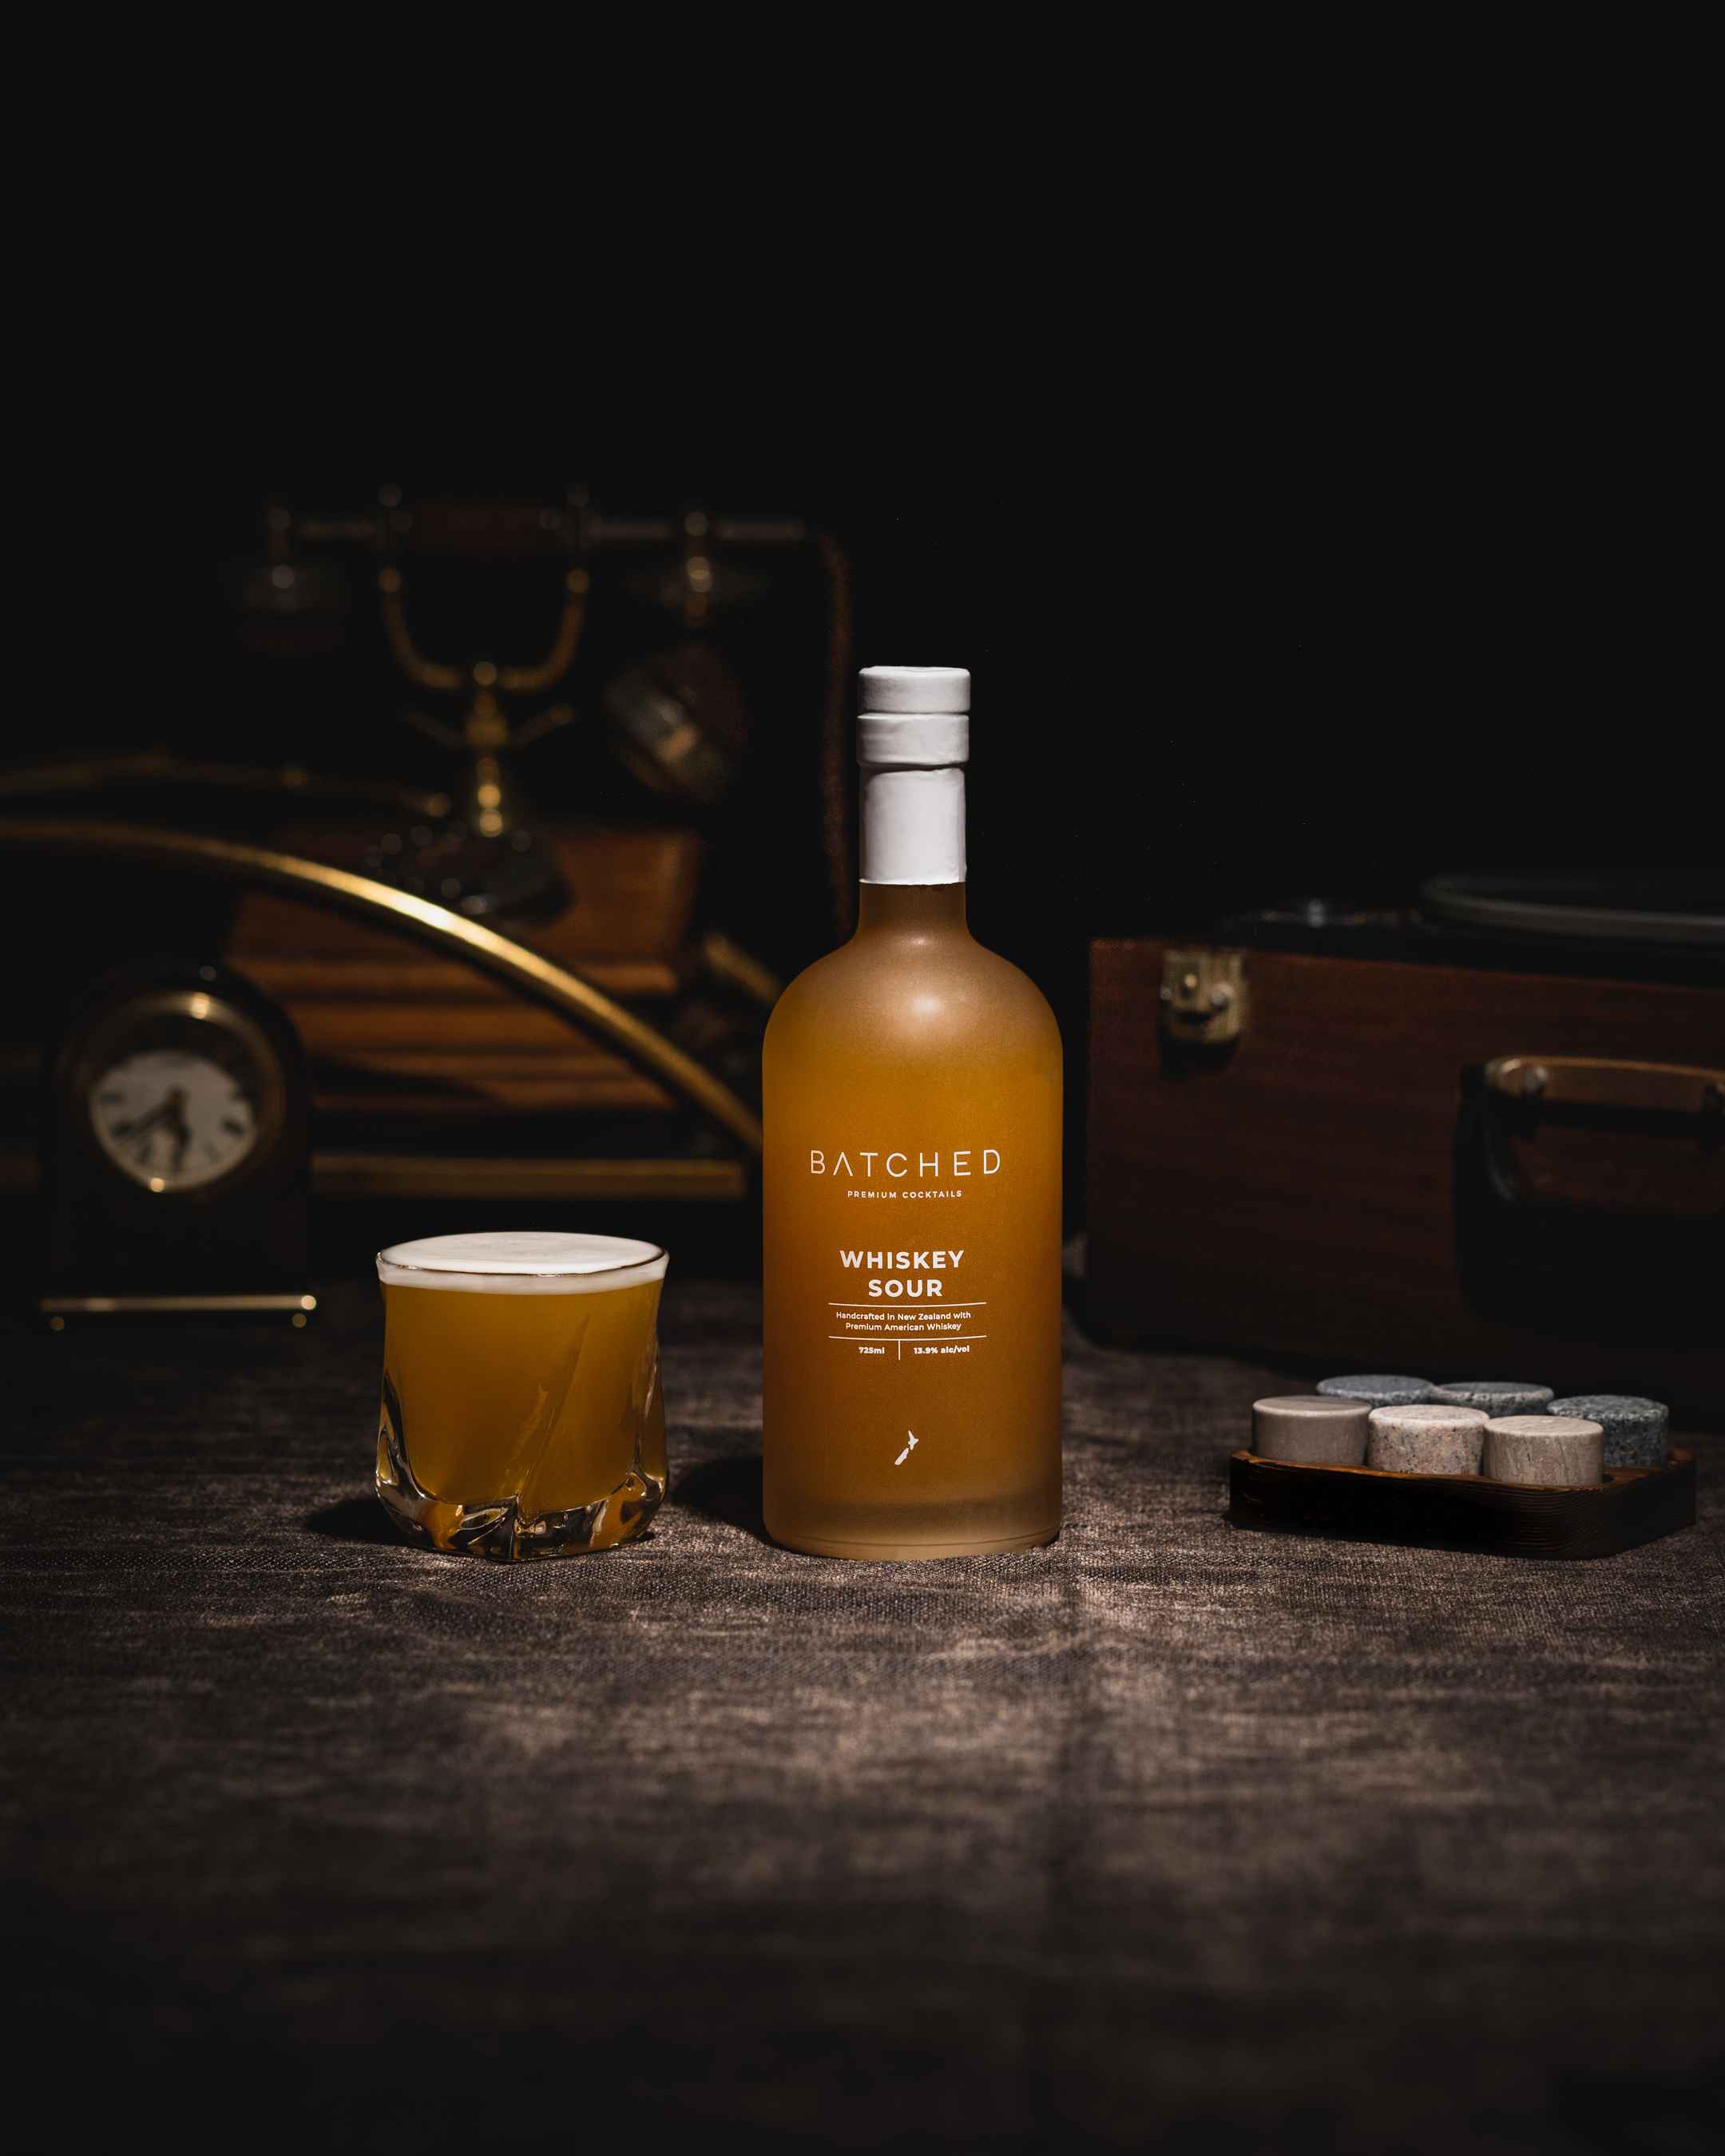 Batched Whiskey Sour bottle with drink served in glass on bench